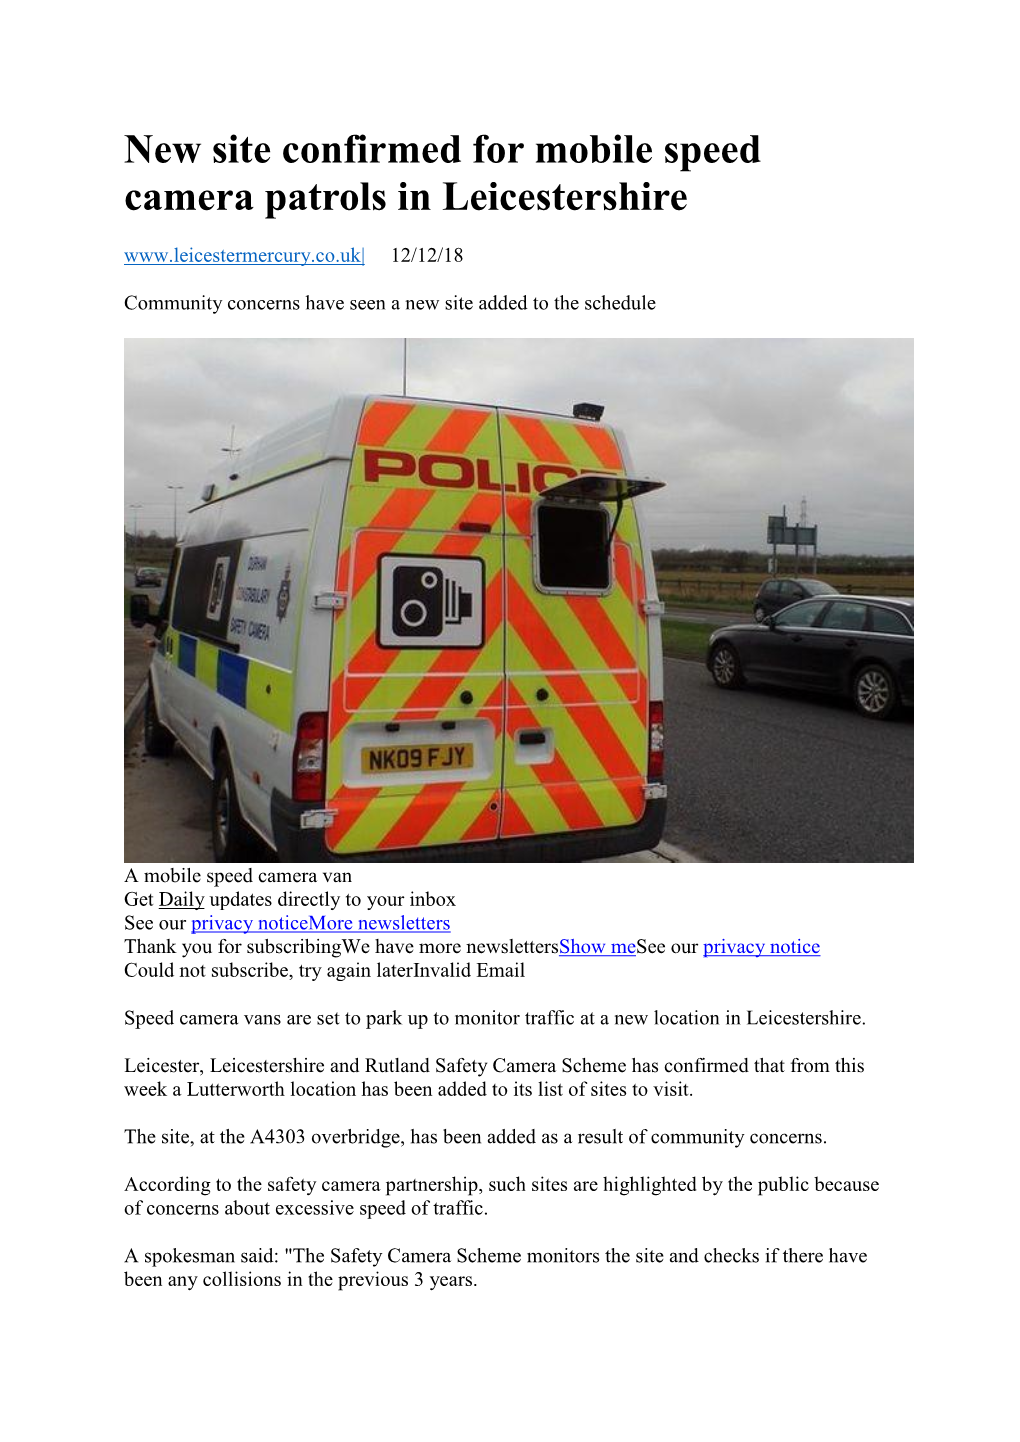 New Site Confirmed for Mobile Speed Camera Patrols in Leicestershire 12/12/18